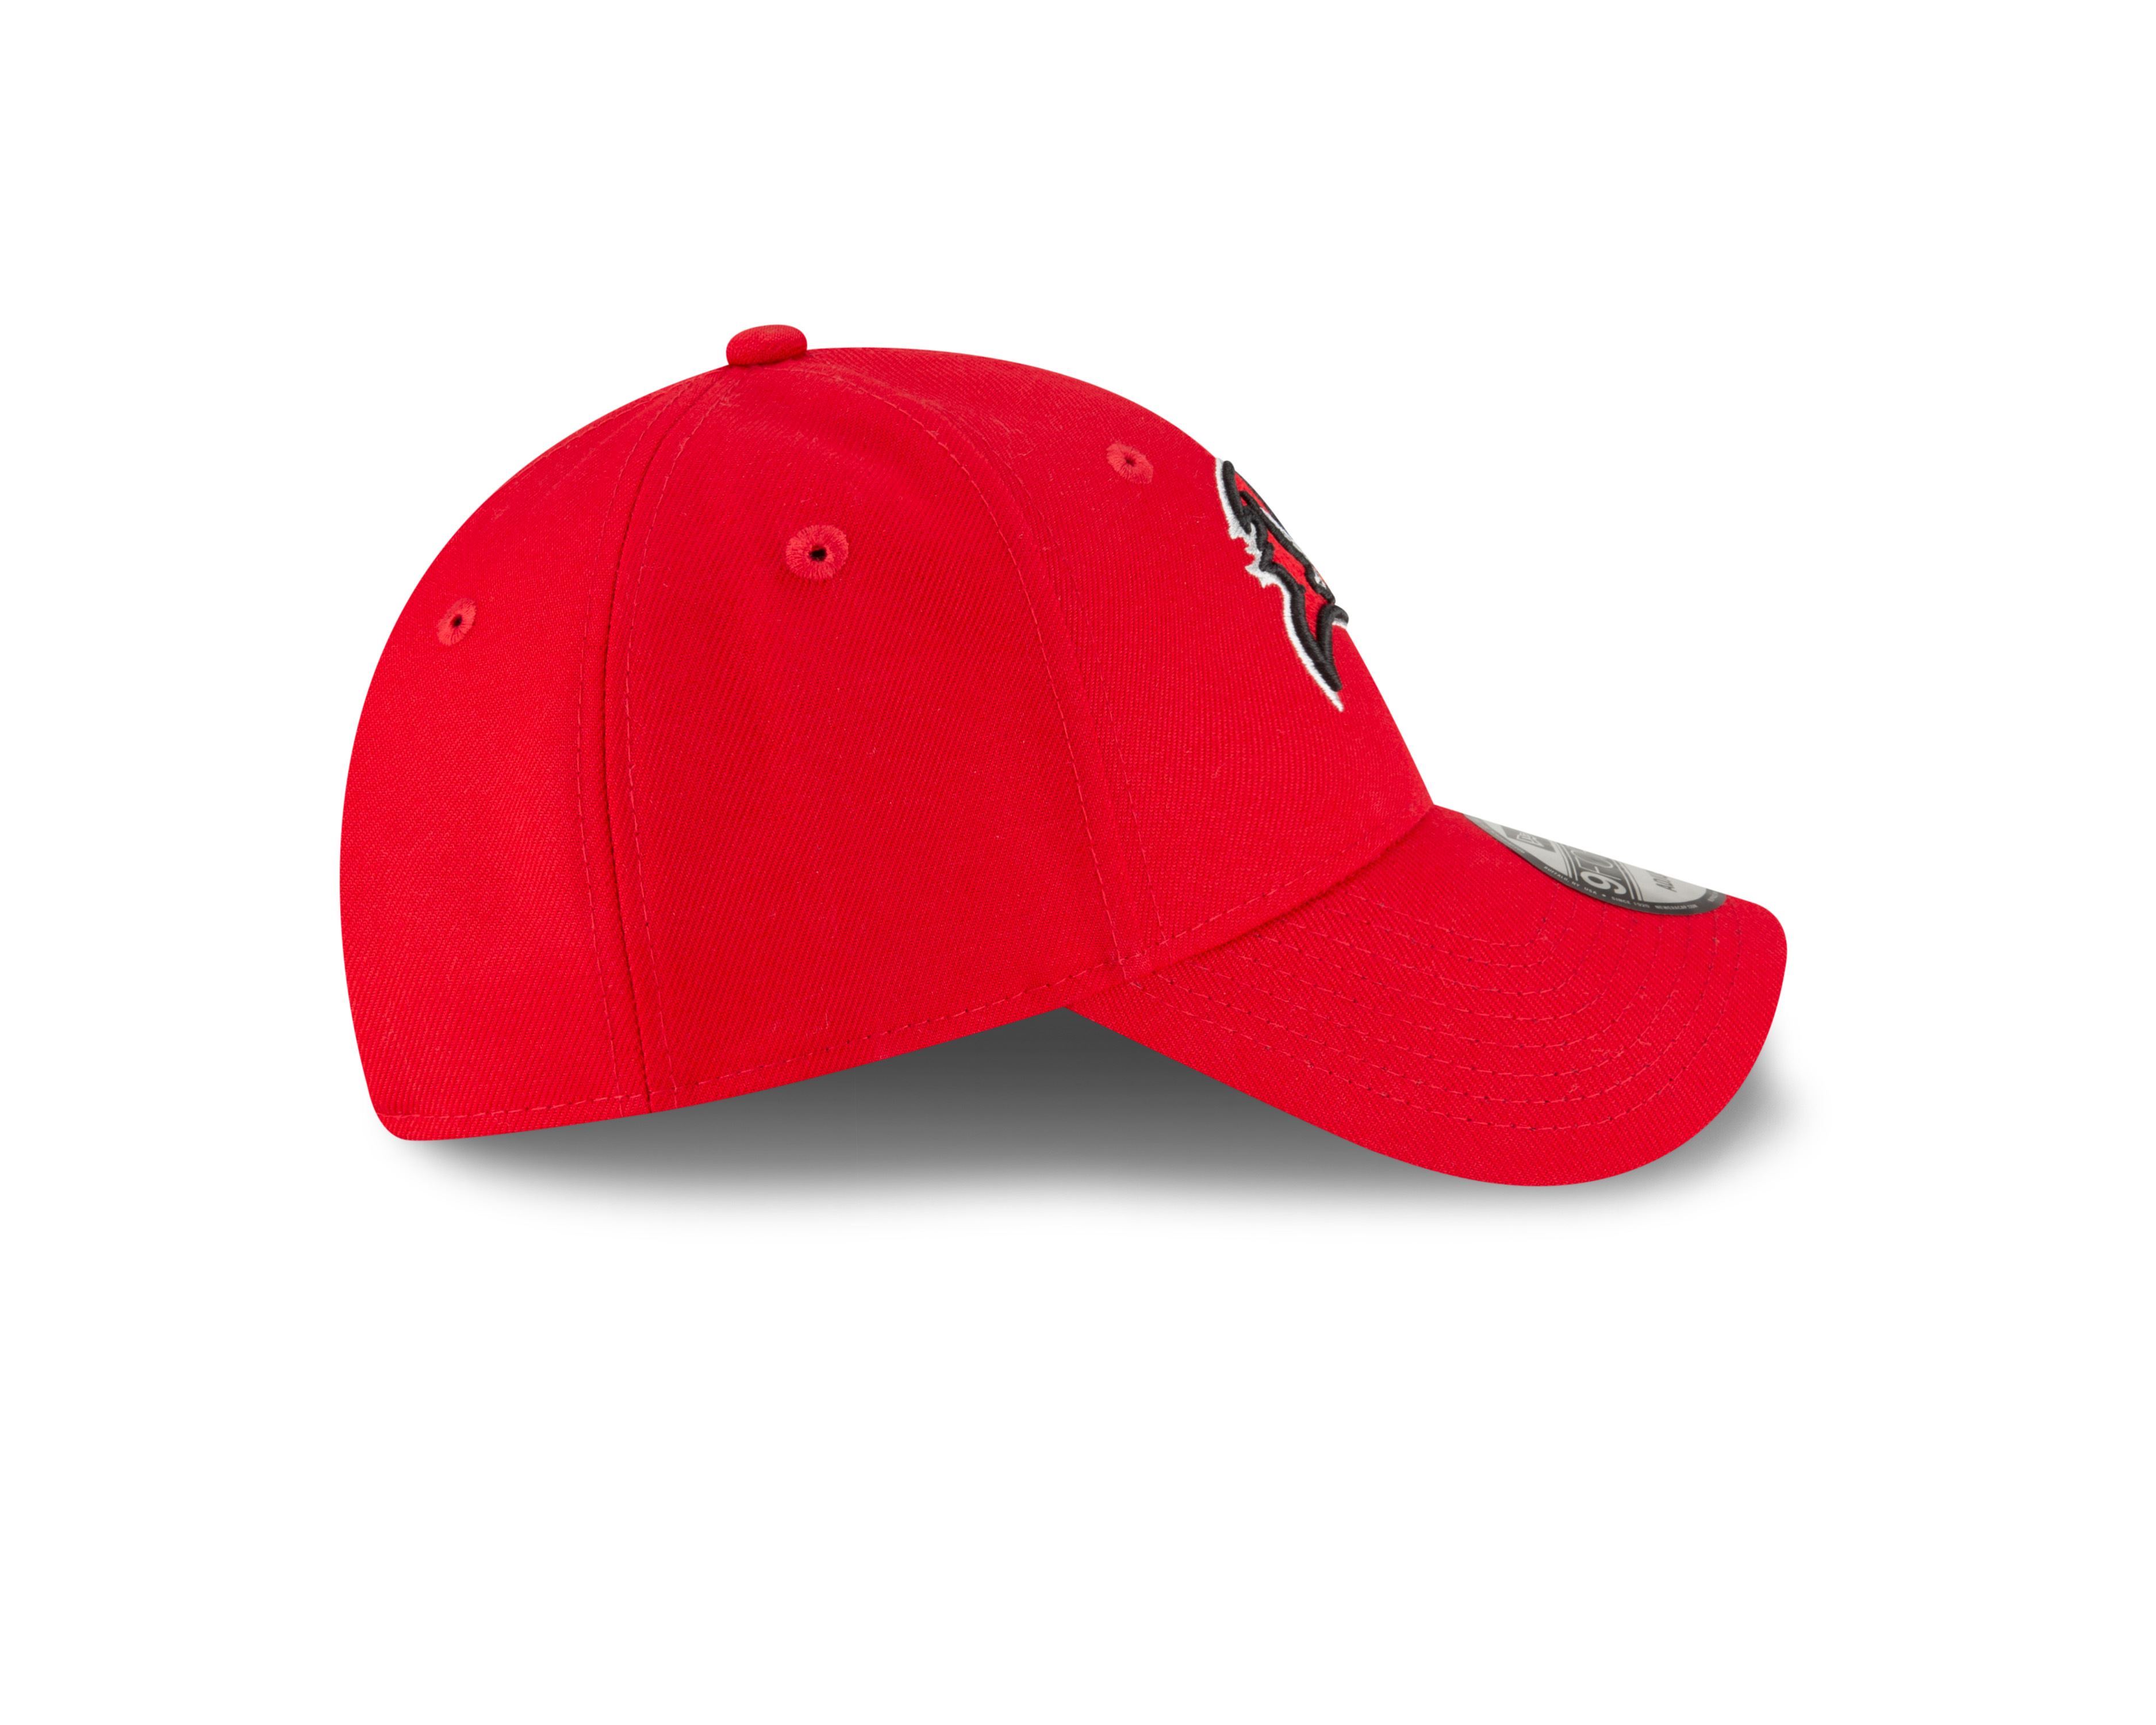 Tampa Bay Buccaneers NFL The League Red 9Forty Adjustable Cap for Kids New Era